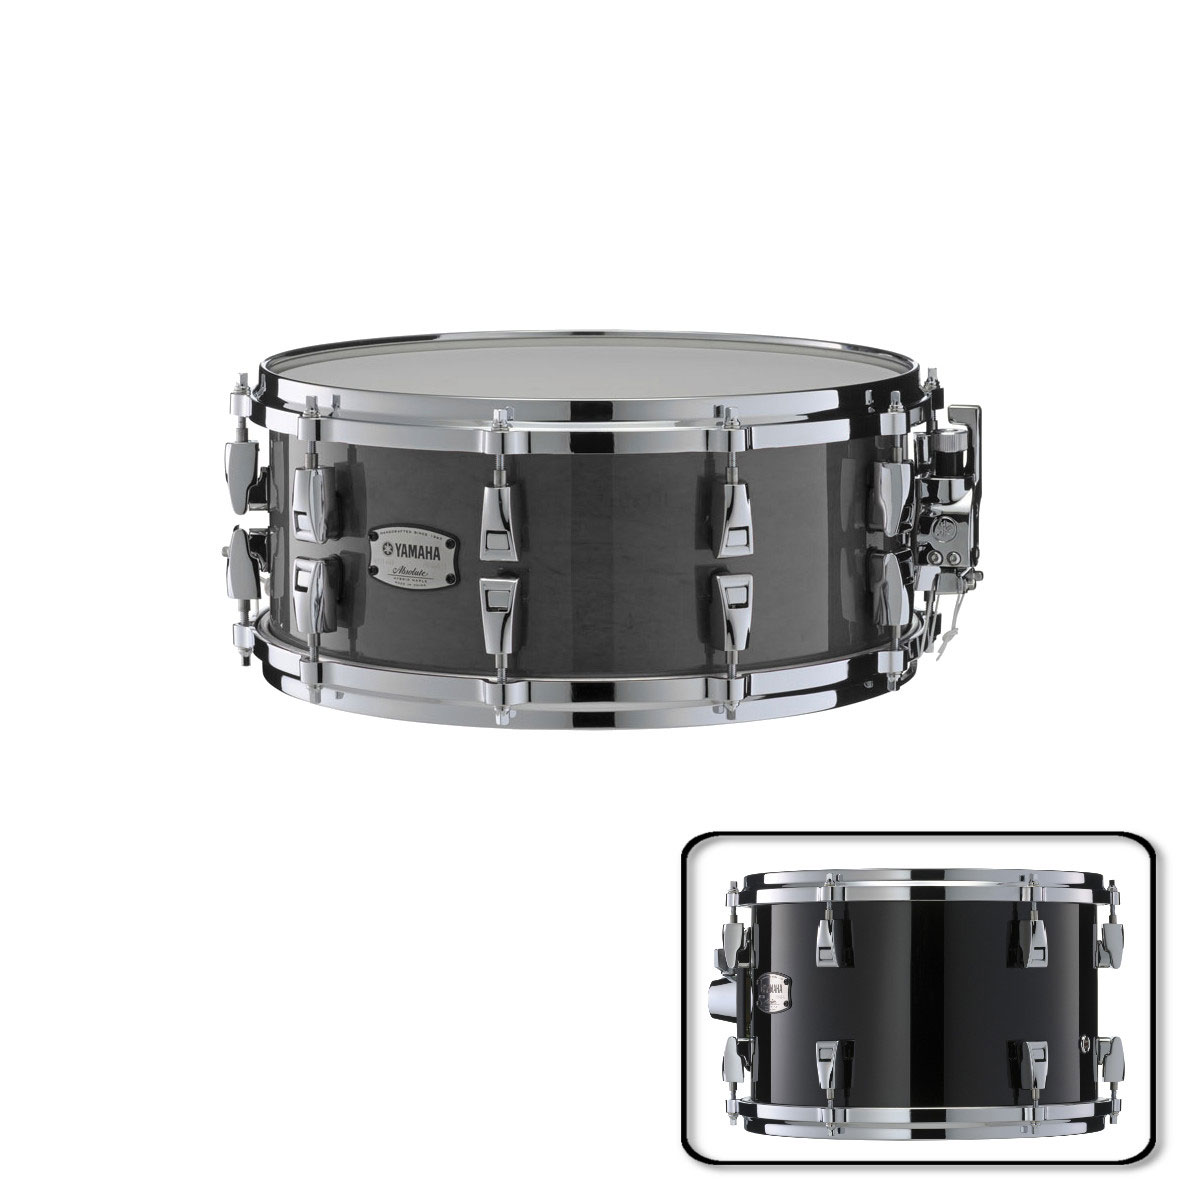 YAMAHA AMS1460 - ABSOLUTE HYBRID MAPLE C CLAIRE 14X6 SOLID BLACK